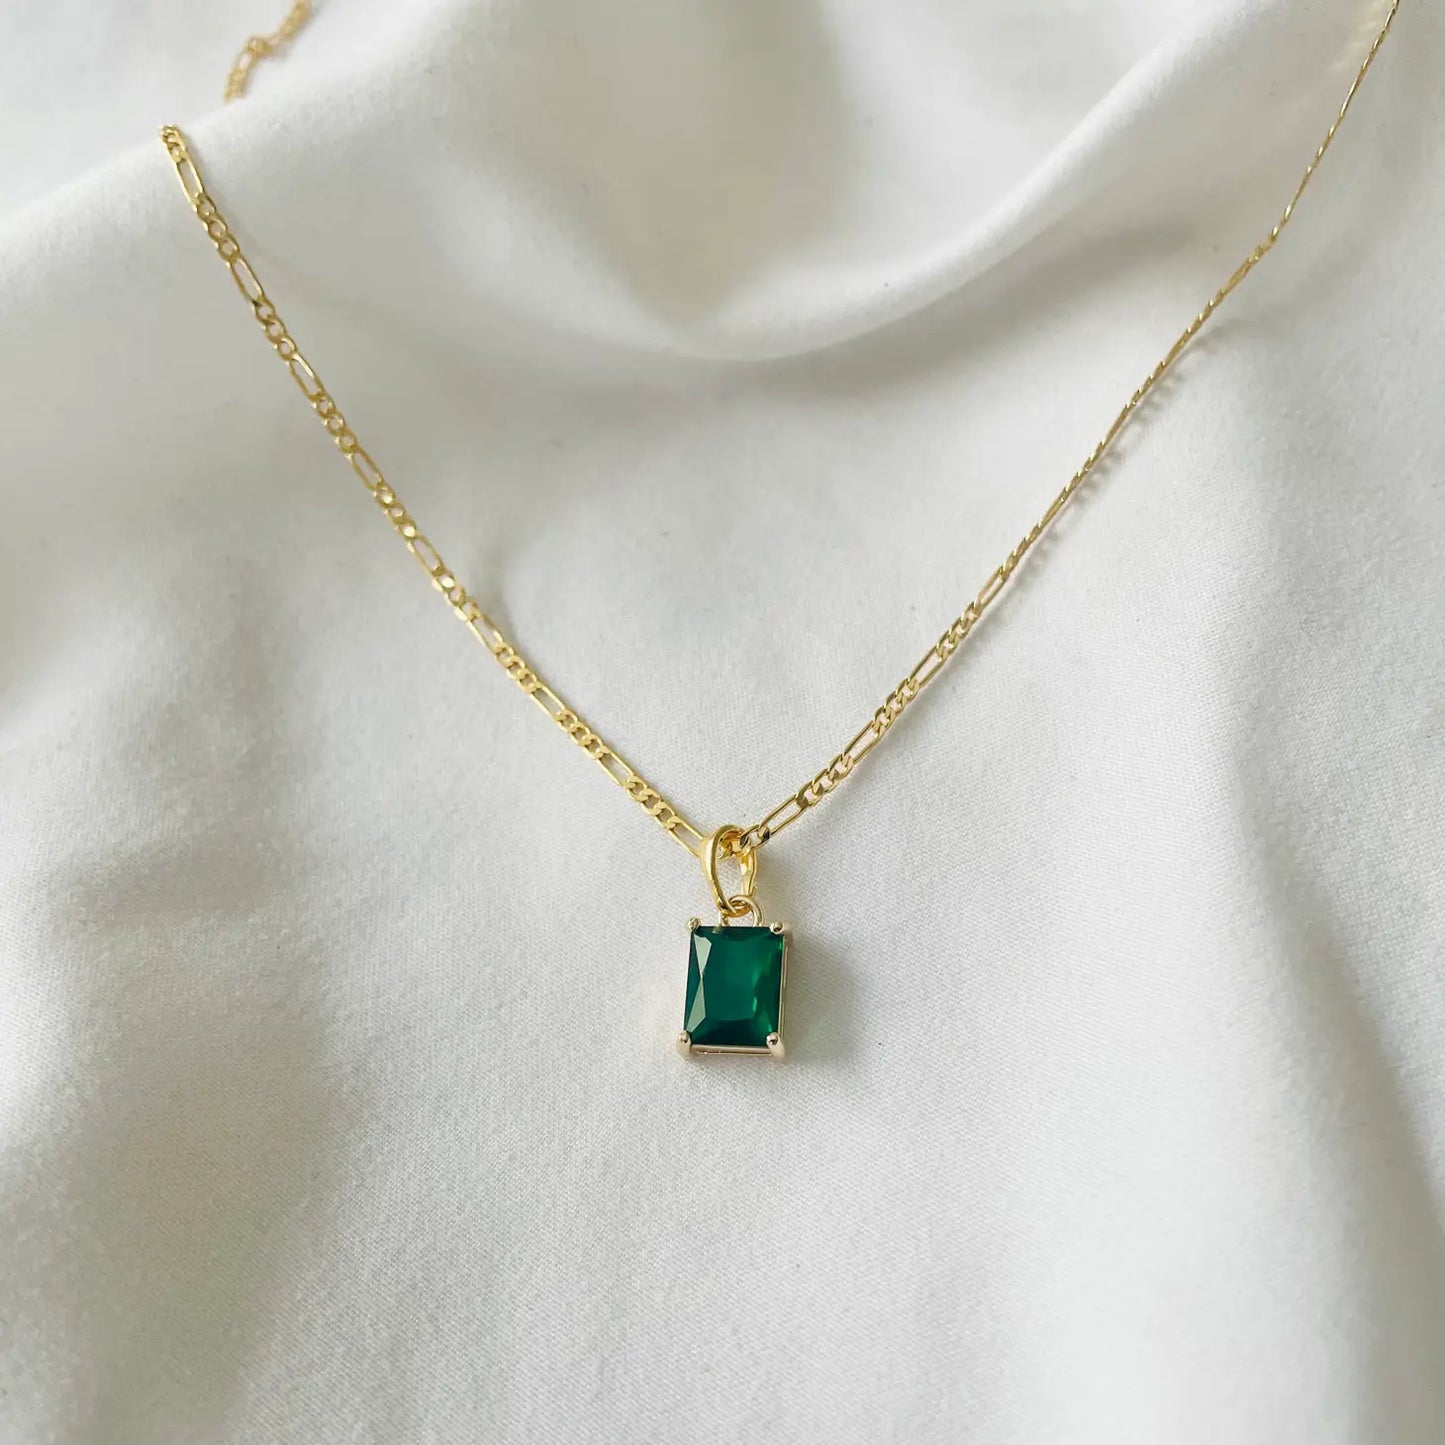 Emerald Faceted Stone Necklace